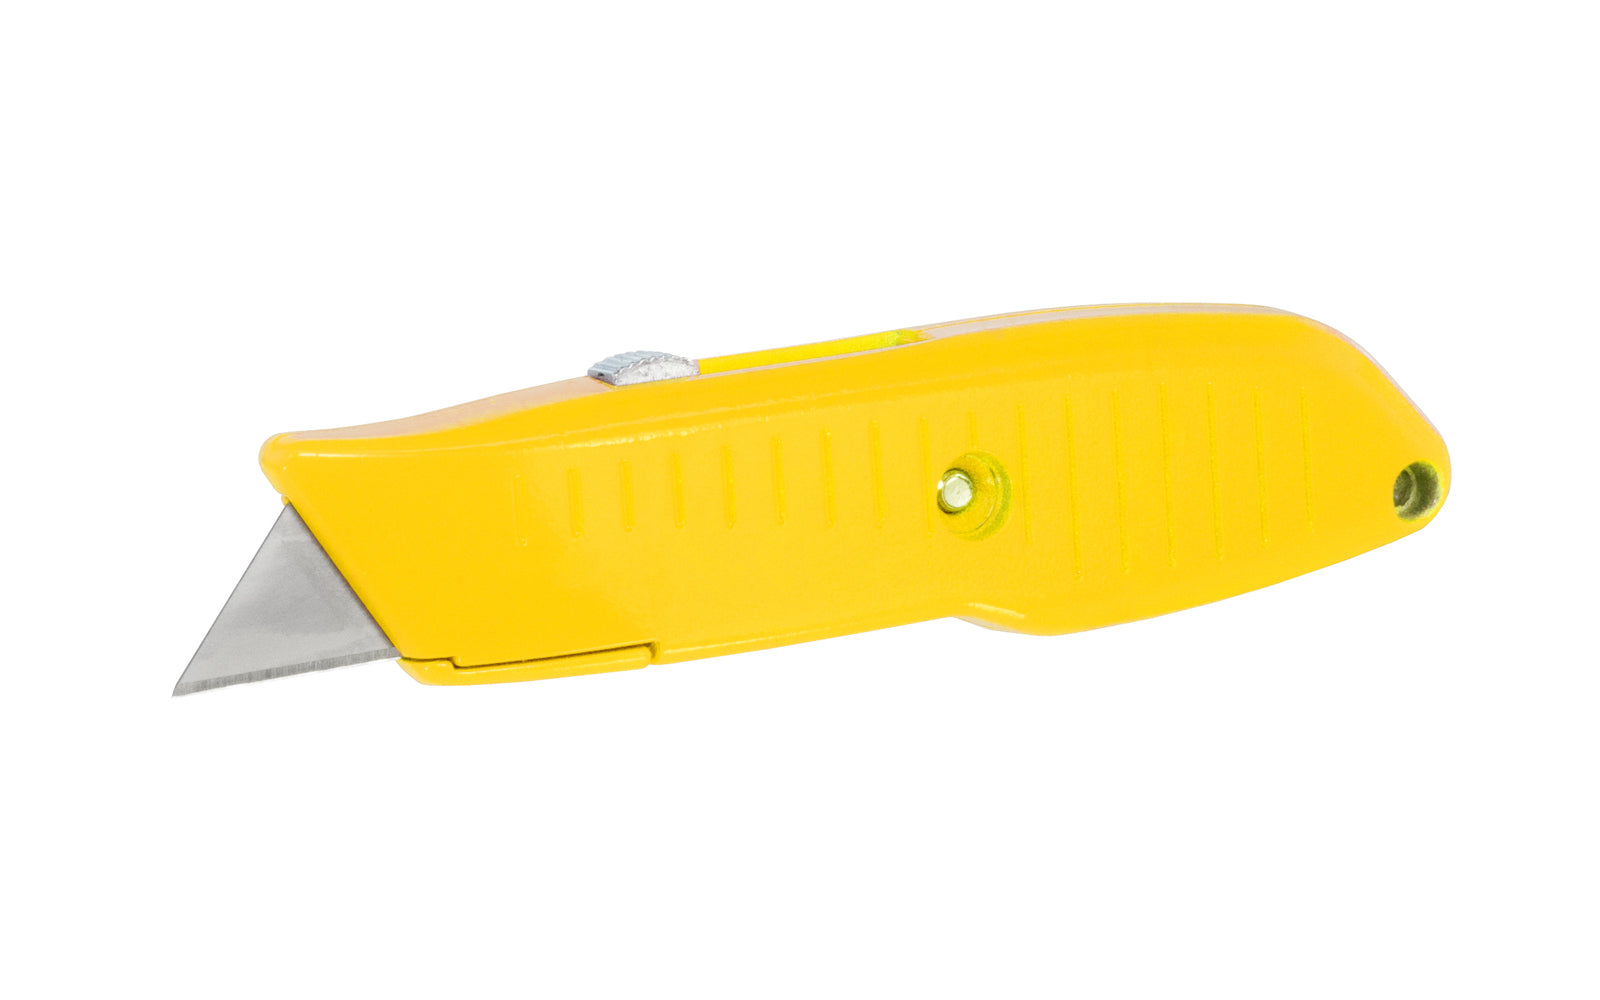 Lutz #82 Retractable Utility Knife in a yellow color. Die cast body from zinc for strength & durability. Etched ribs for a good grip. Metal utility knife with built zinc retractor for smooth operation in three cutting positions. Blade storage inside knife. Takes heavy duty utility knife blades. 052427382023. Model 82